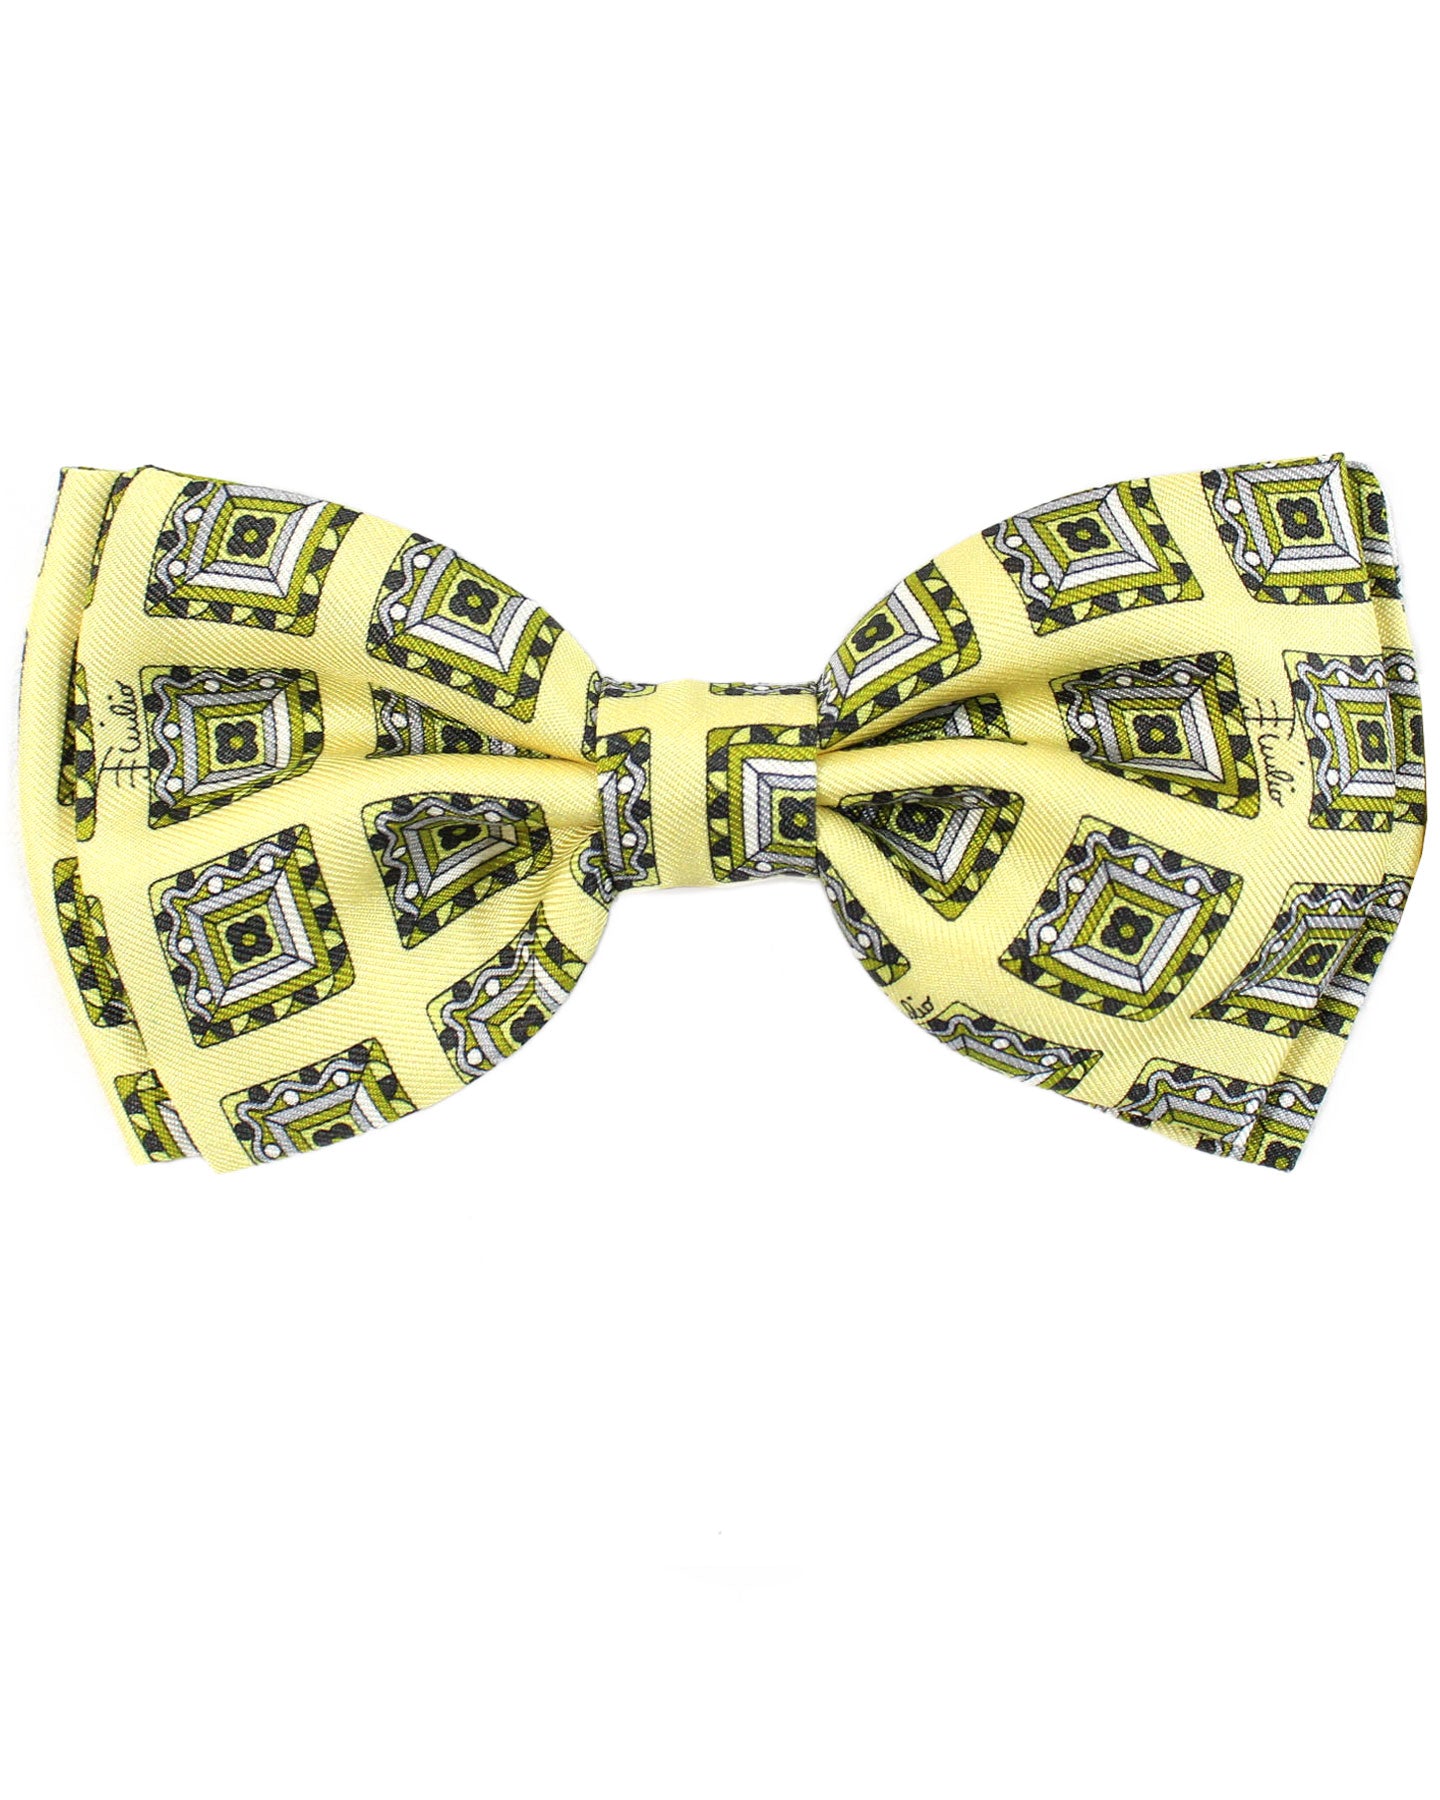 Emilio Pucci Silk Bow Tie Yellow Olive Gray Medallions - Made In Italy